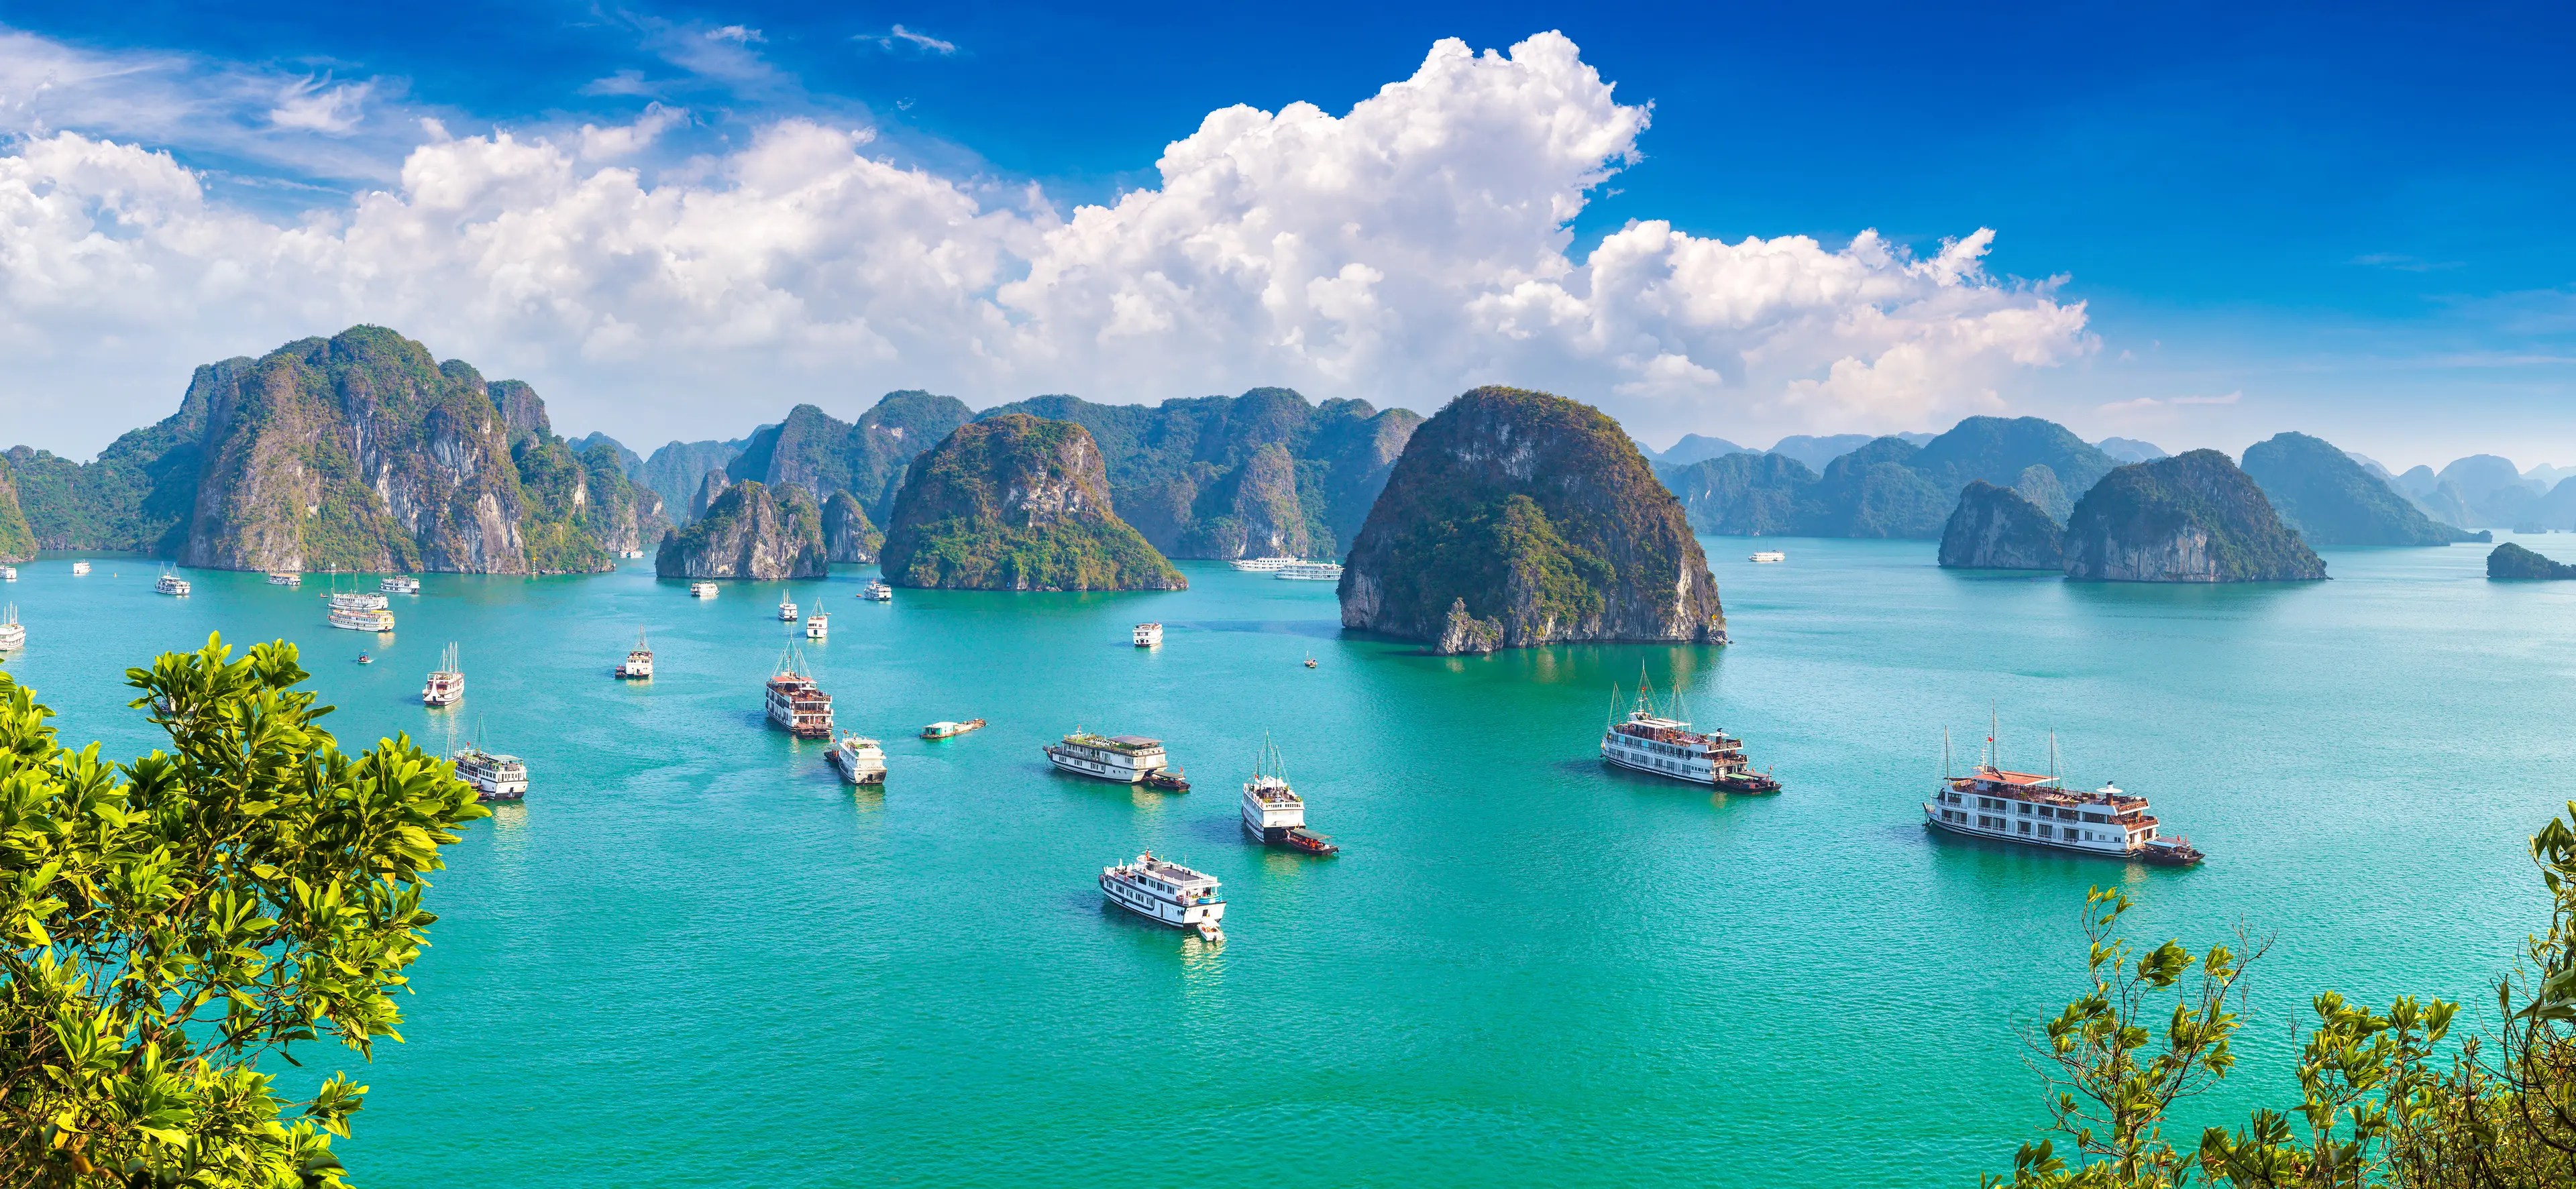 Aerial view of the Ha Long Bay area with tourist vessels spread around the waters